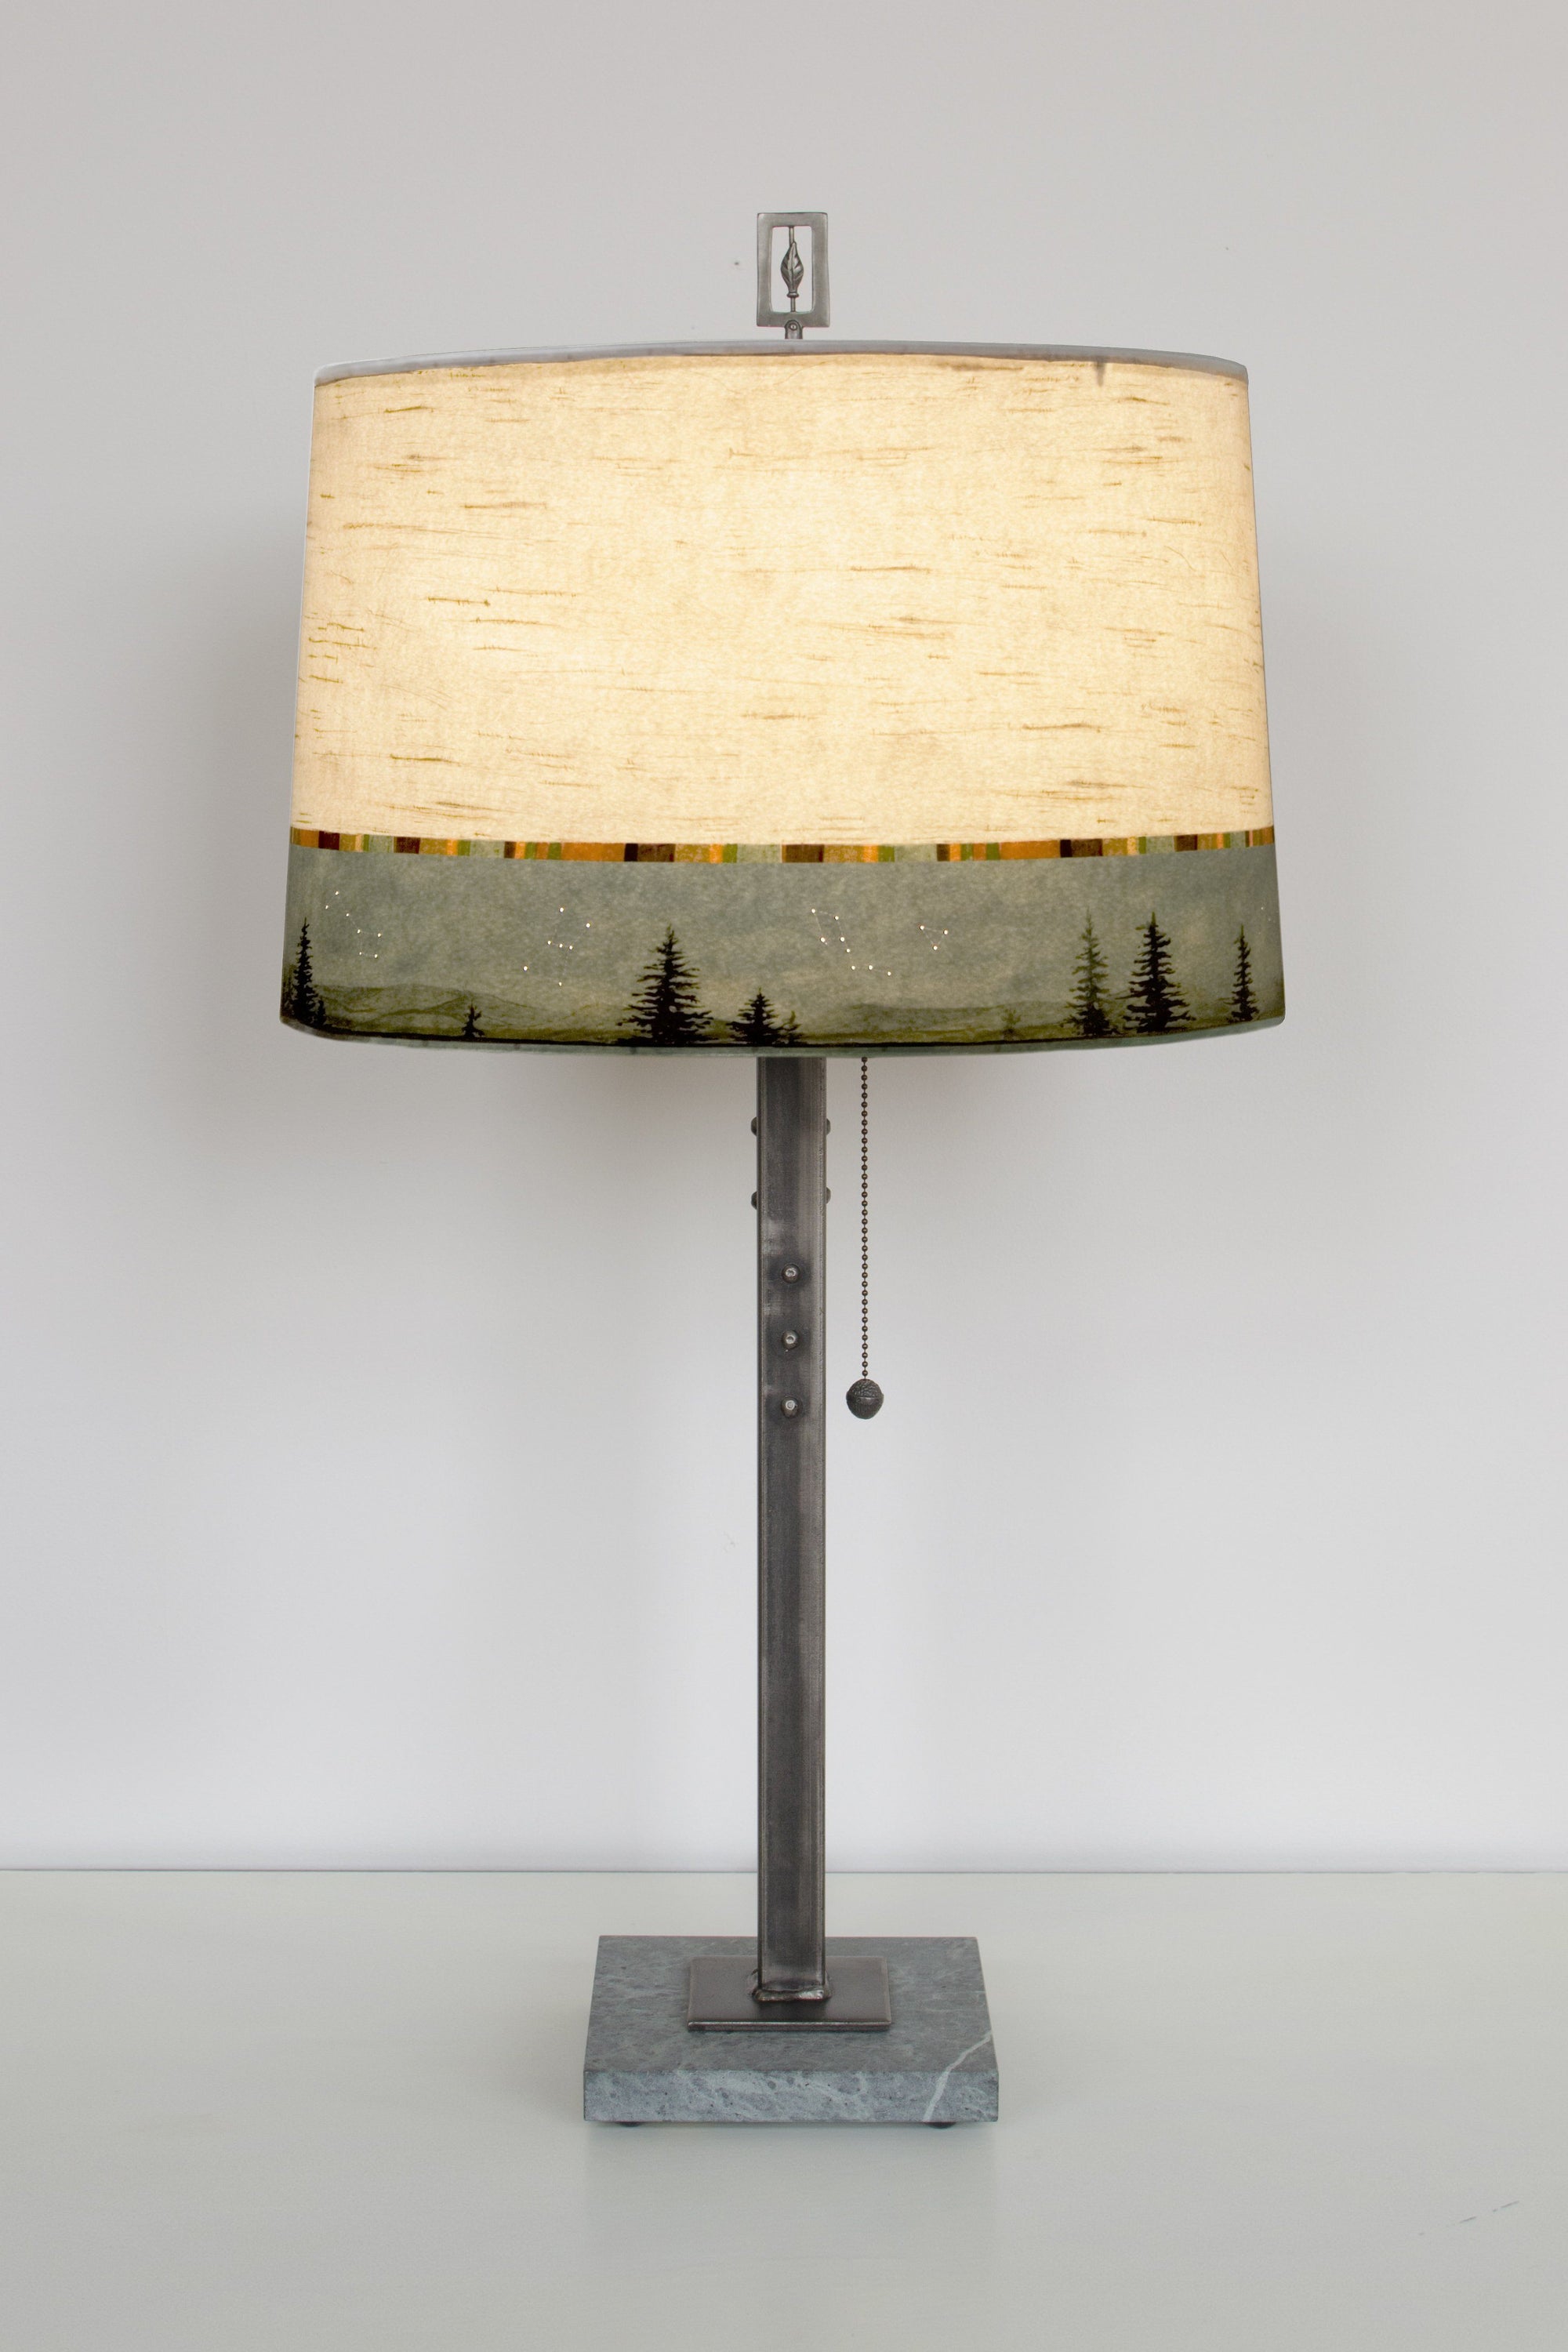 Janna Ugone & Co Table Lamps Steel Table Lamp with Large Drum Shade in Birch Midnight